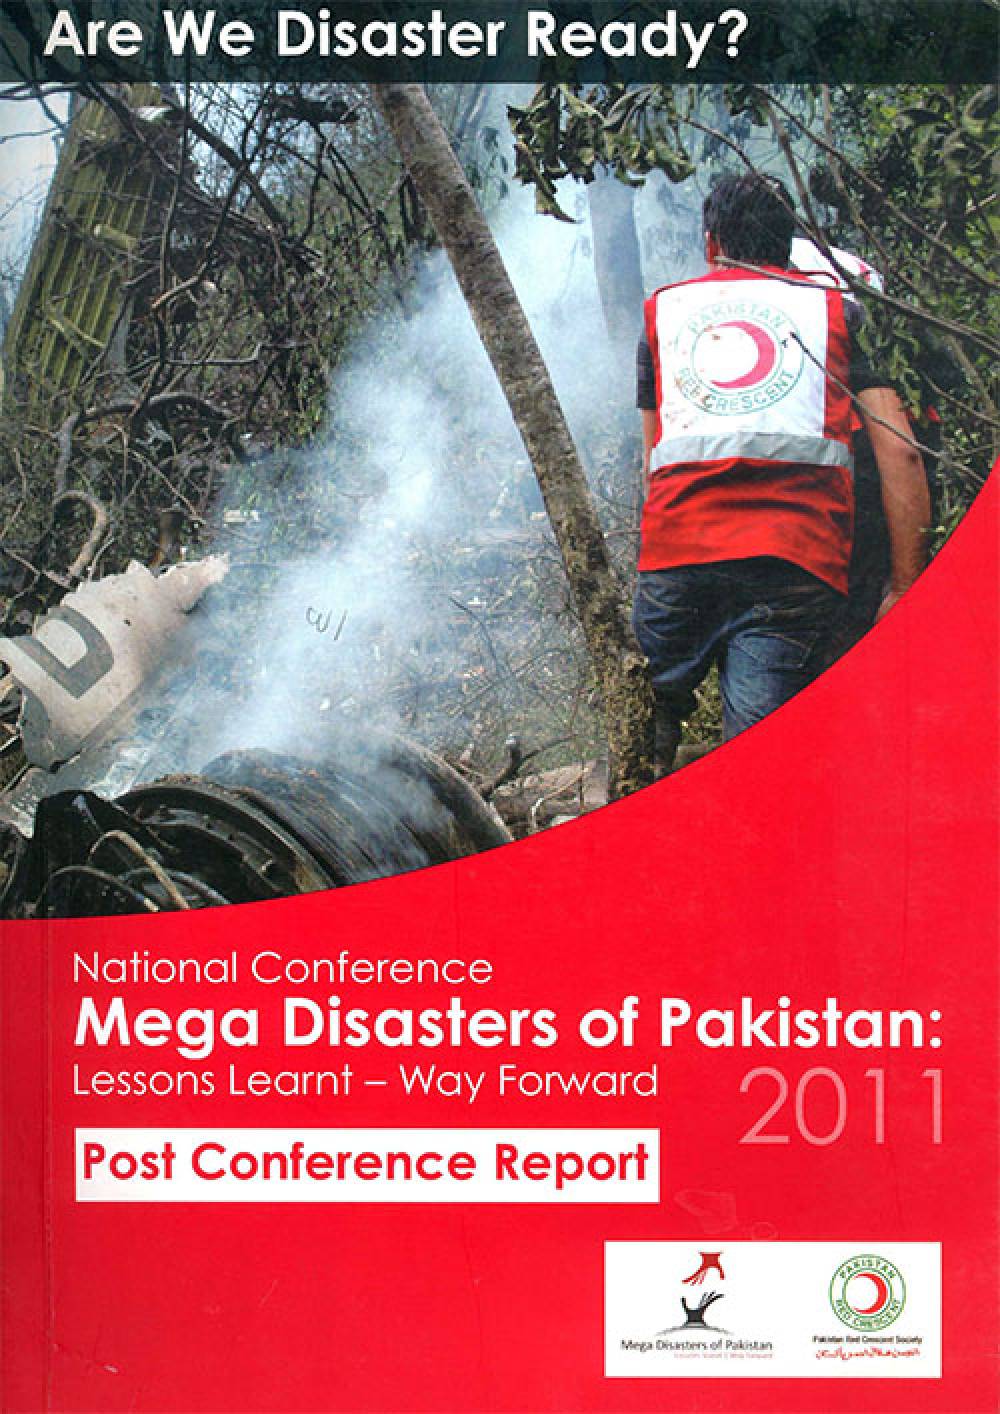 Mega Disasters of Pakistan Post Conference Report 2011